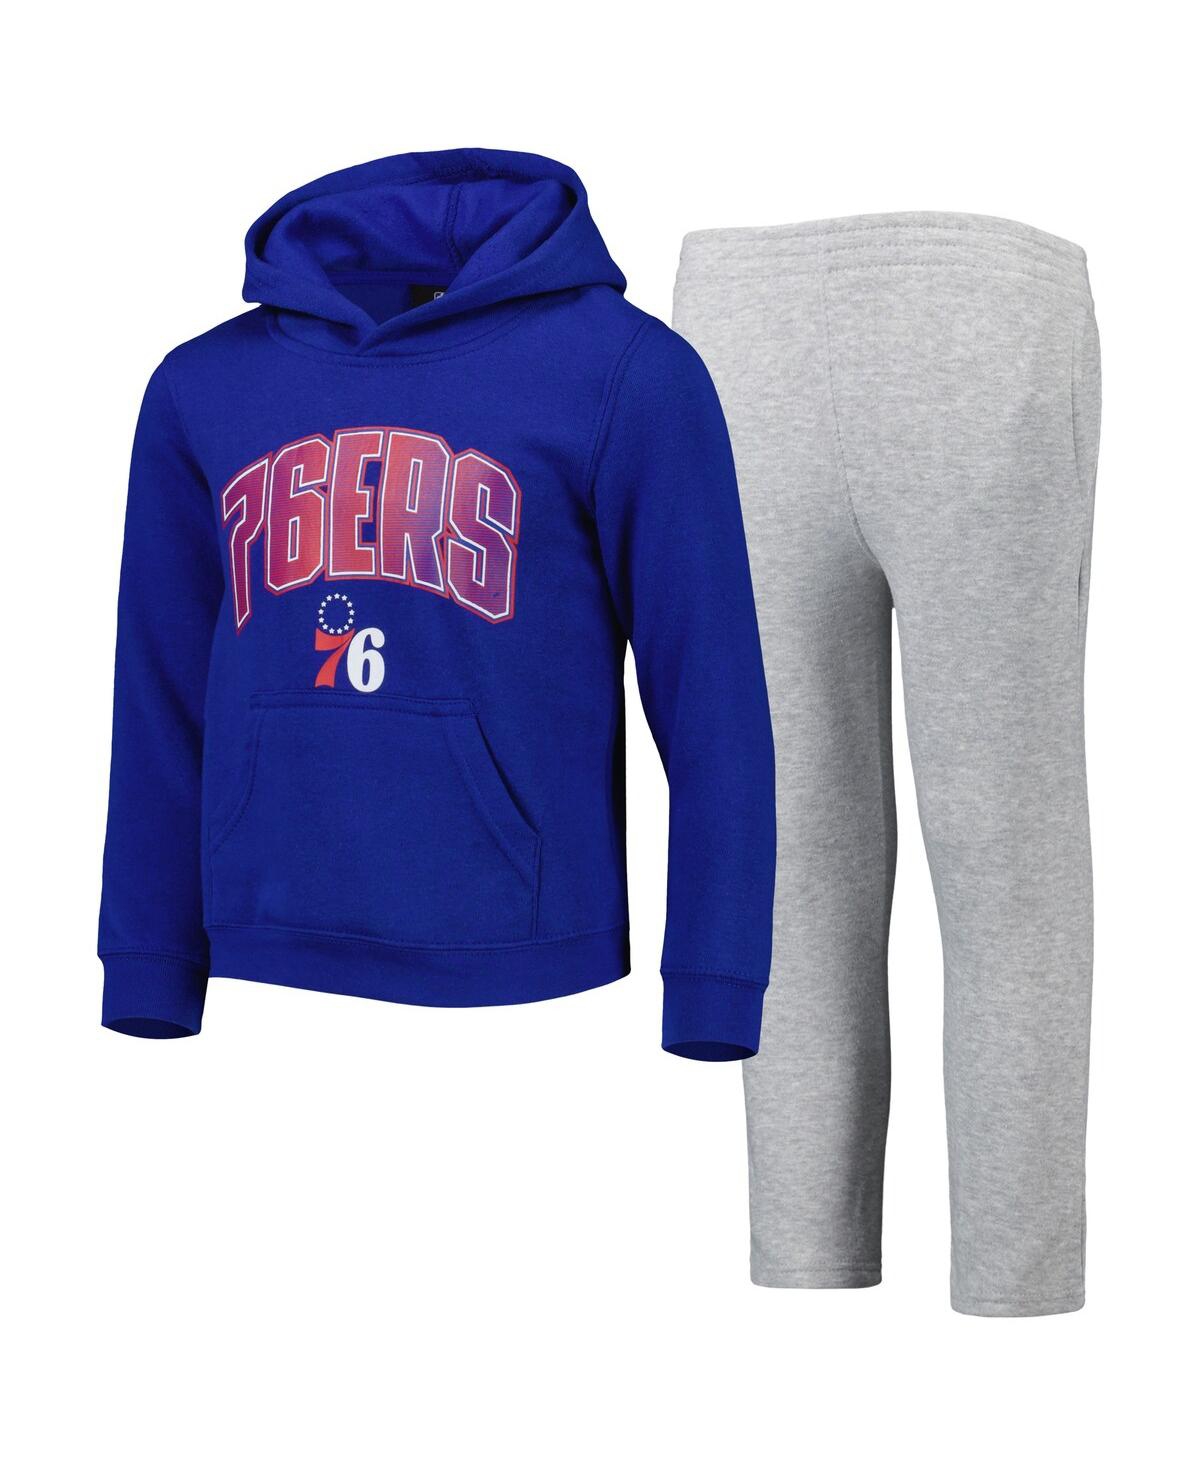 Outerstuff Kids' Little Boys And Girls Royal, Heather Gray Philadelphia 76ers Double Up Pullover Hoodie And Pants Set In Royal,heather Gray